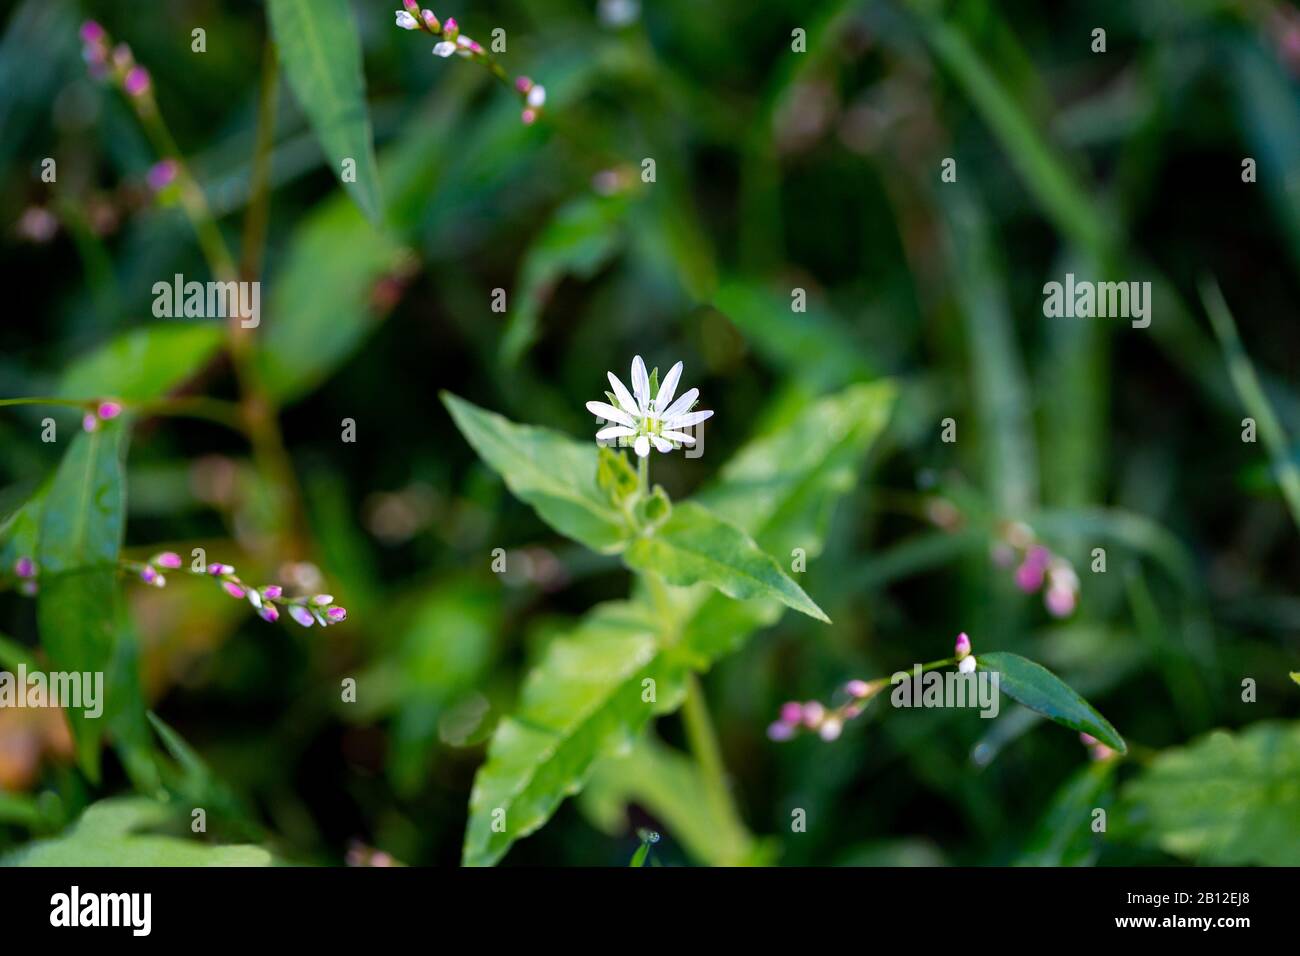 Stellaria media chickweed flower close-up on blurred green grass background, small pink flowers. Stock Photo